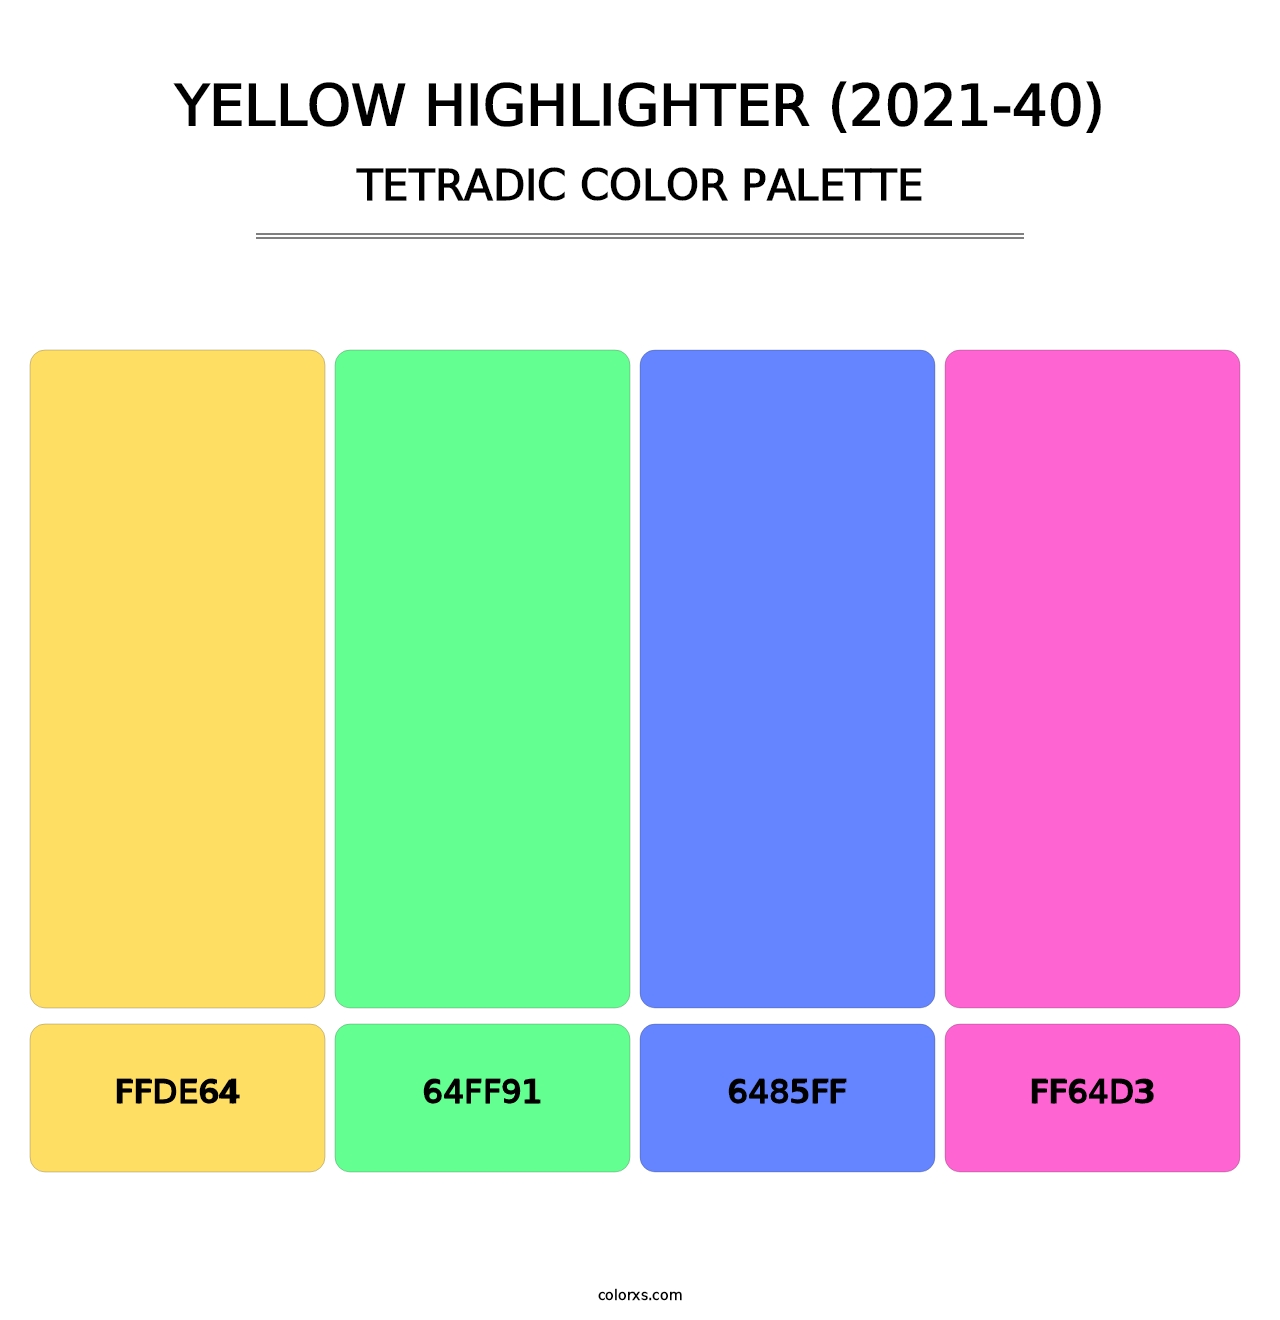 Yellow Highlighter (2021-40) - Tetradic Color Palette